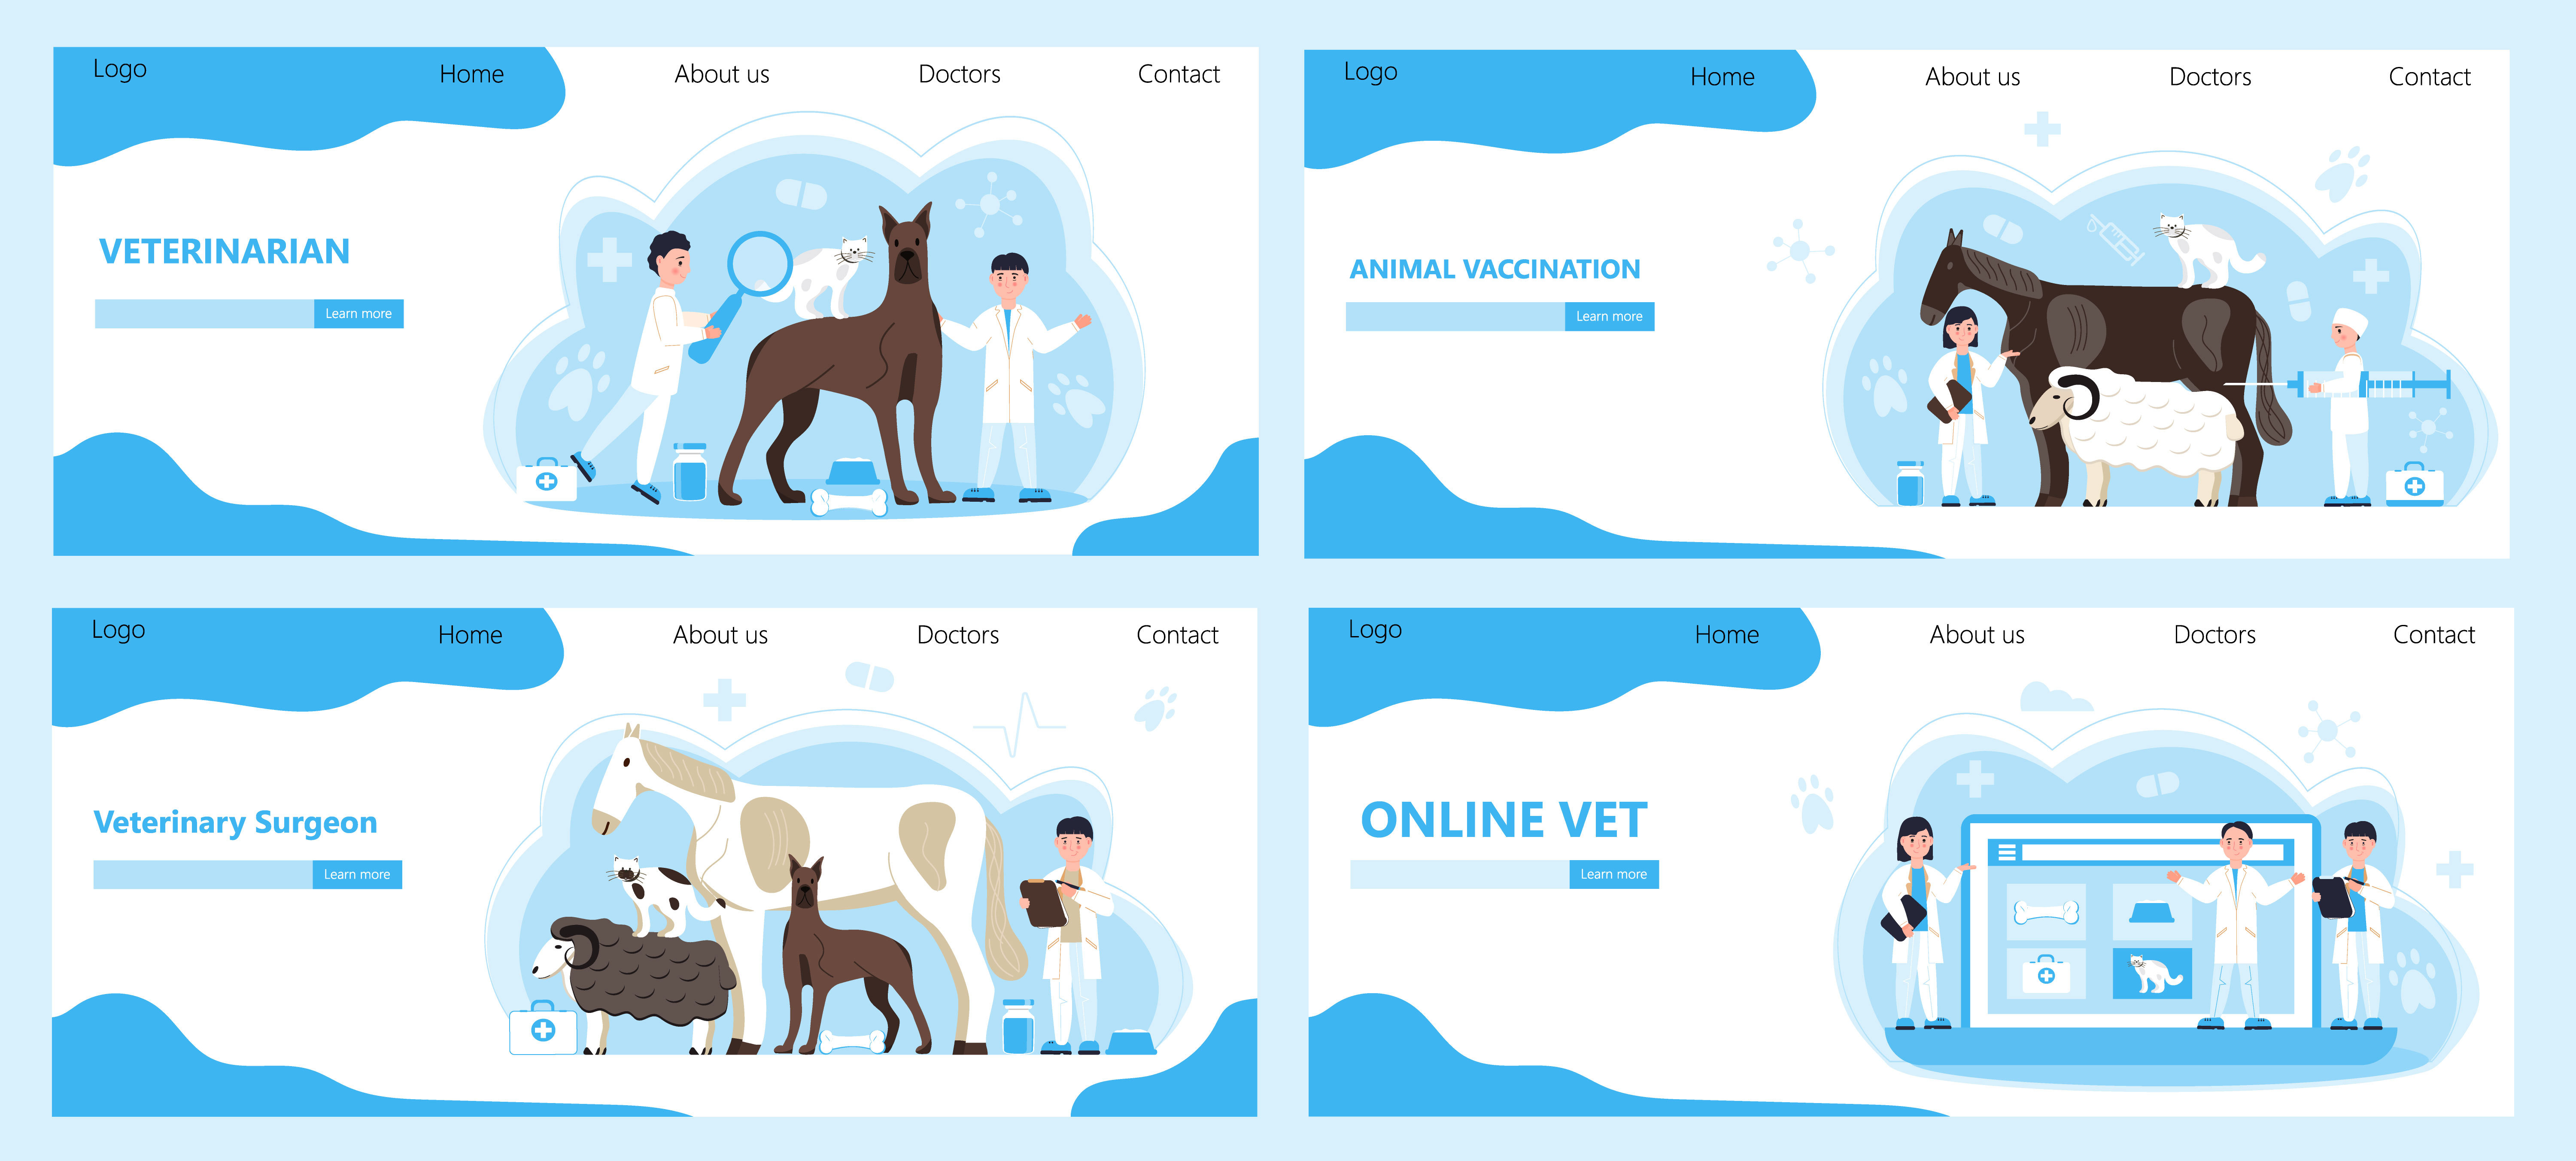 Veterinarian concept vector. Animal doctors diagnosing diseases of dog, cat. Pet health care for website. Veterinary physician treatment illness creatures.. Veterinarian concept vector. Animal doctors diagnosing diseases of dog, cat. Pet health care for website. Veterinary physician treatment illness